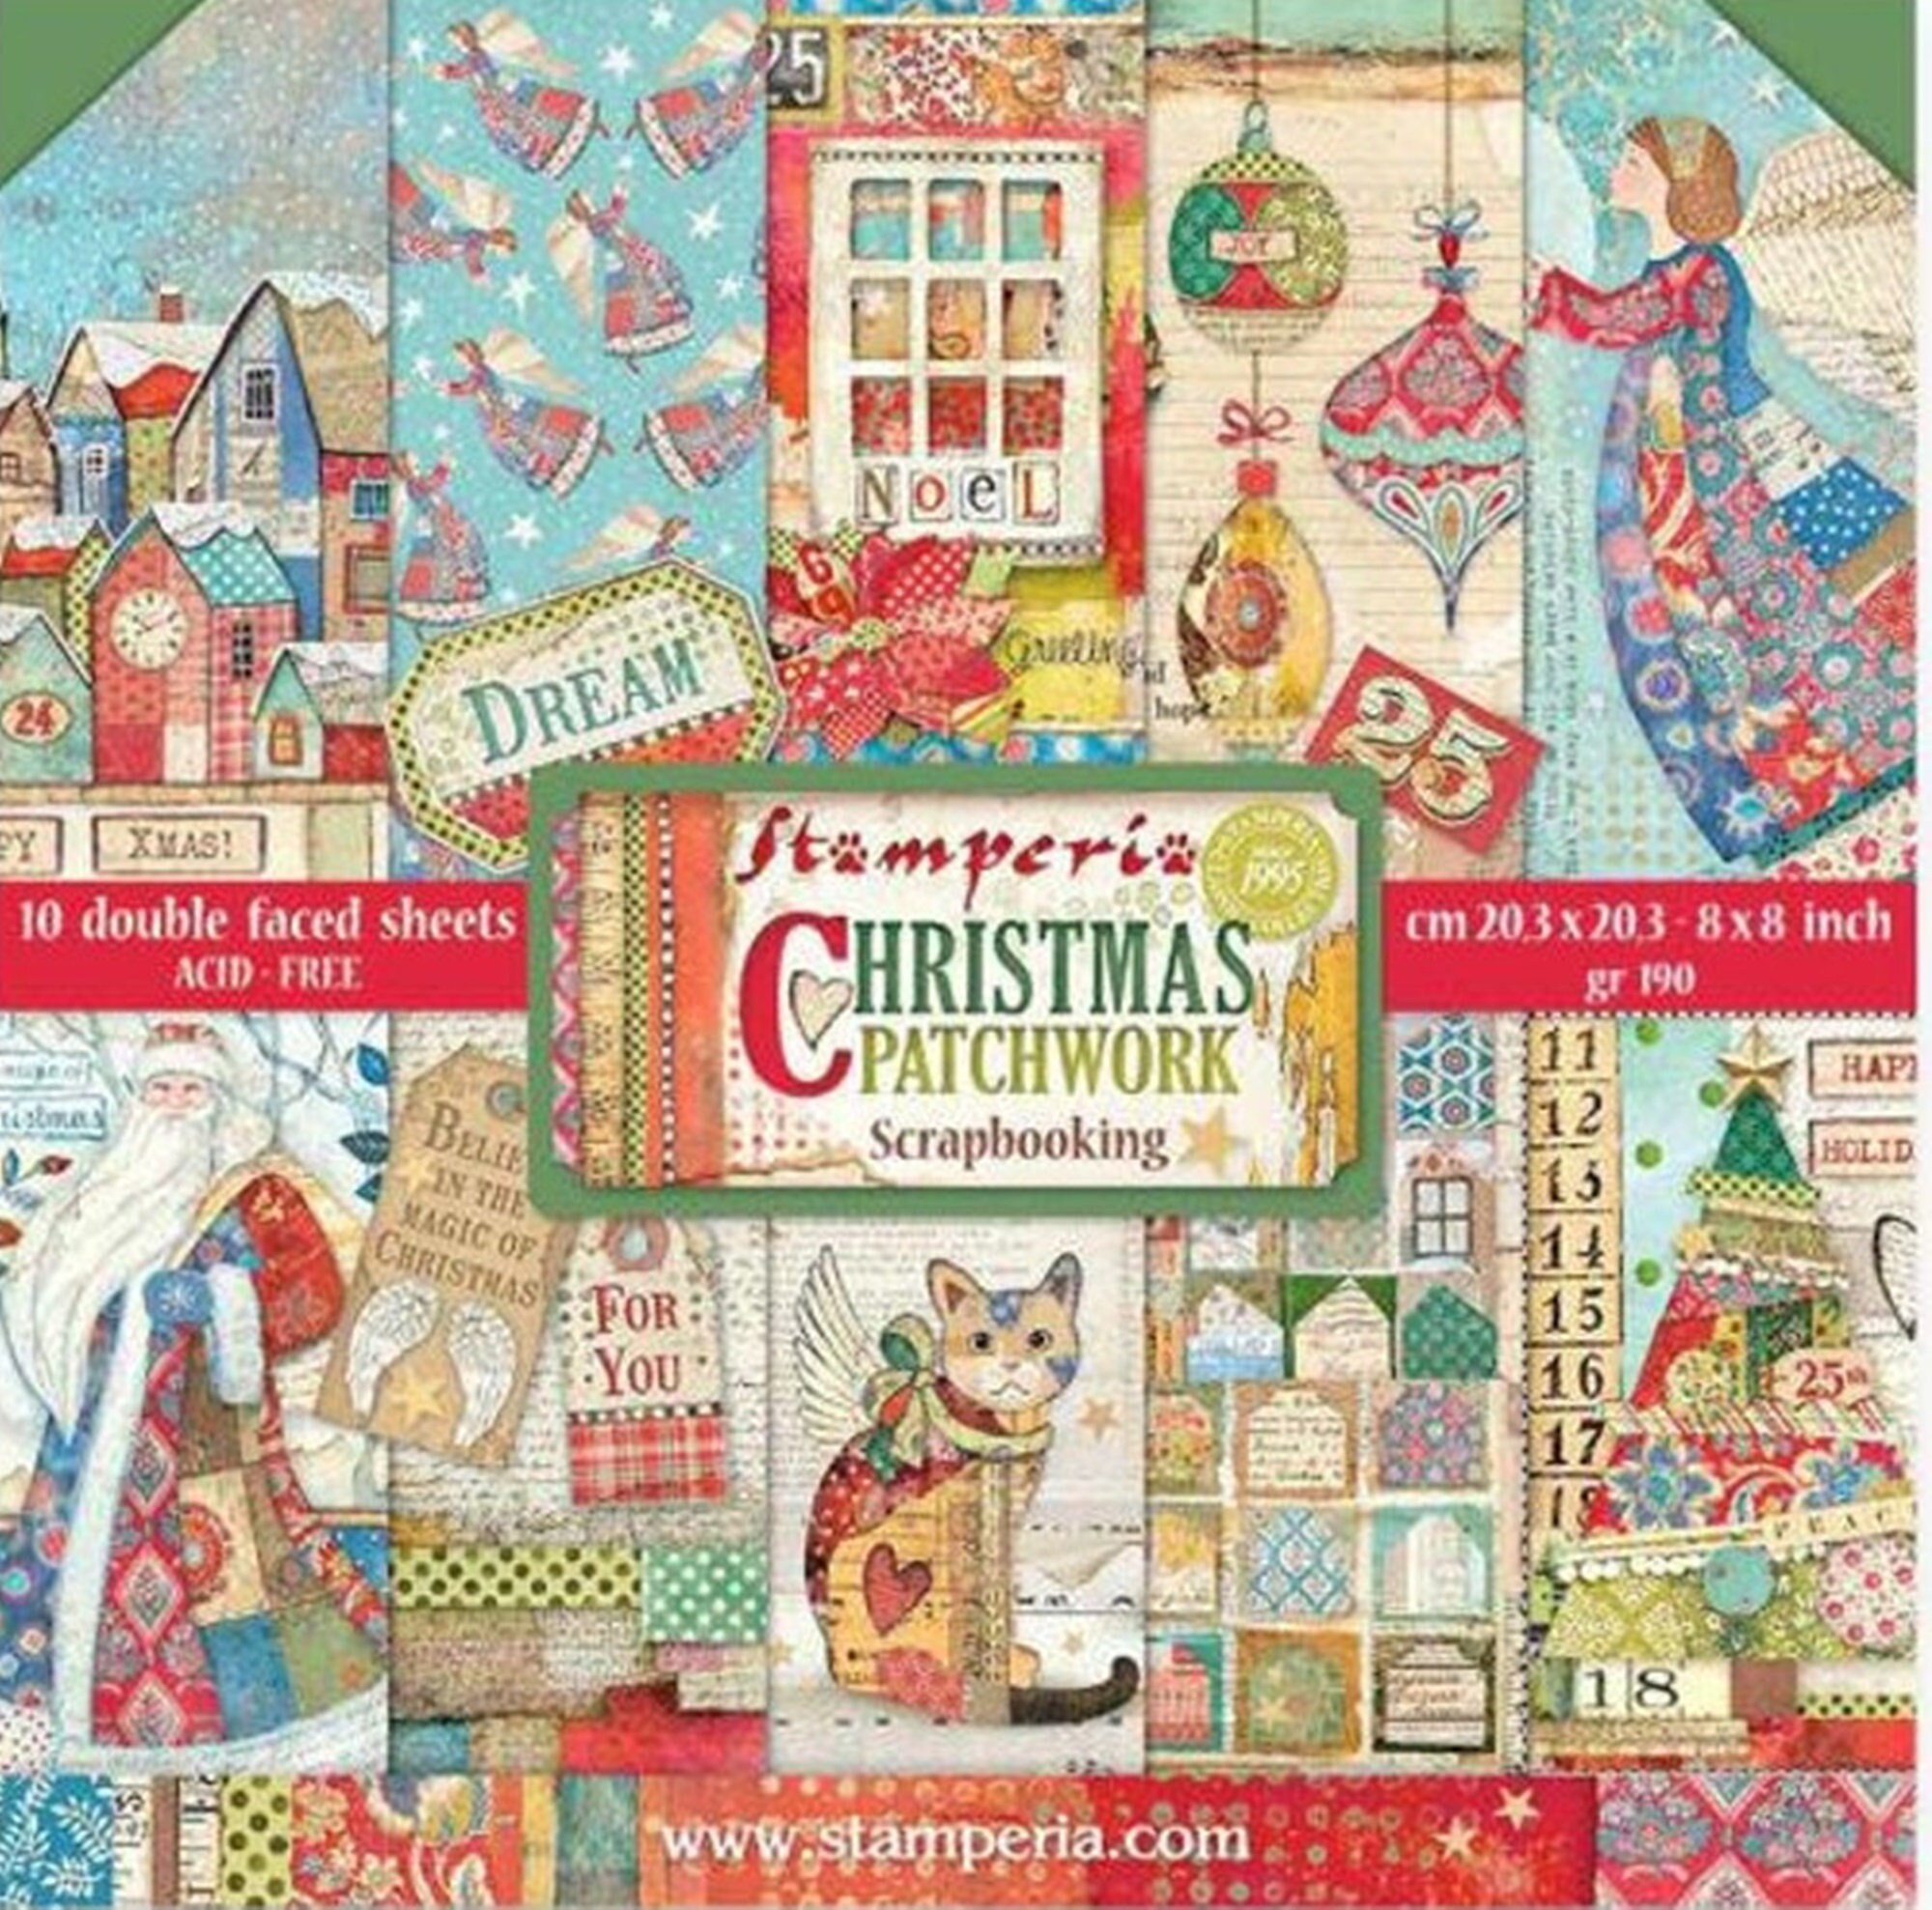 Stamperia 12x12 Paper Pack - Pink Christmas – Dreamz Etc